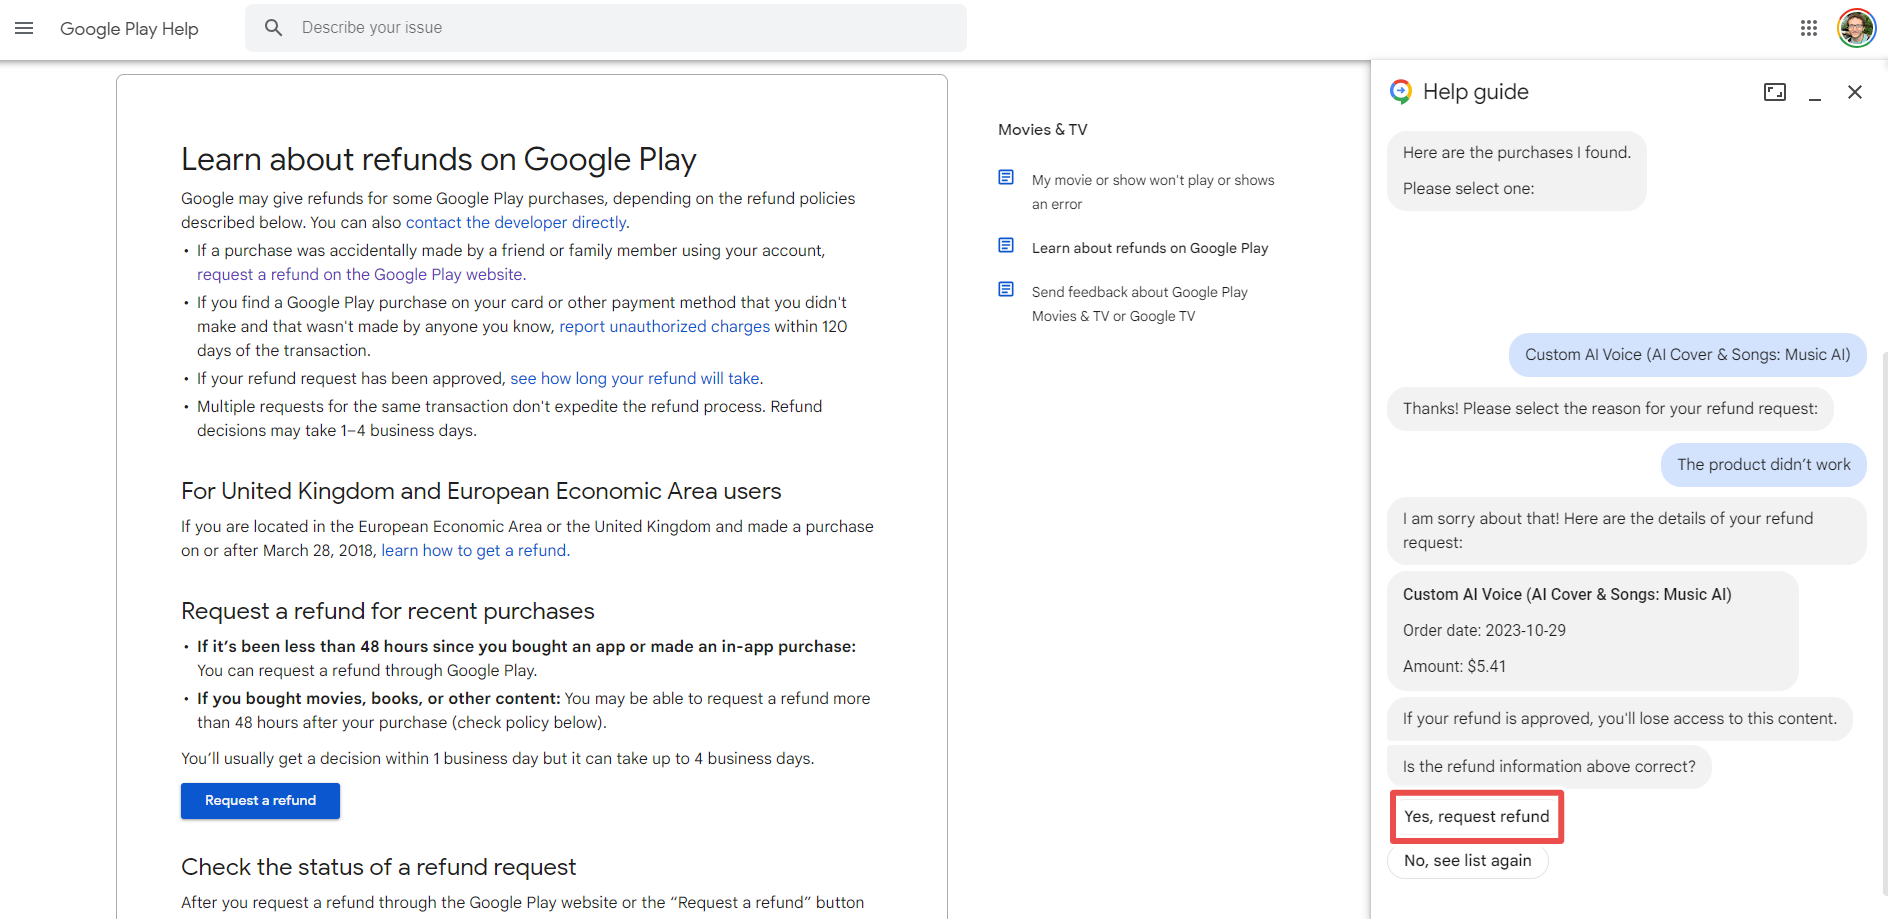 Google Play refund conversation with 'Yes, request refund' highlighted